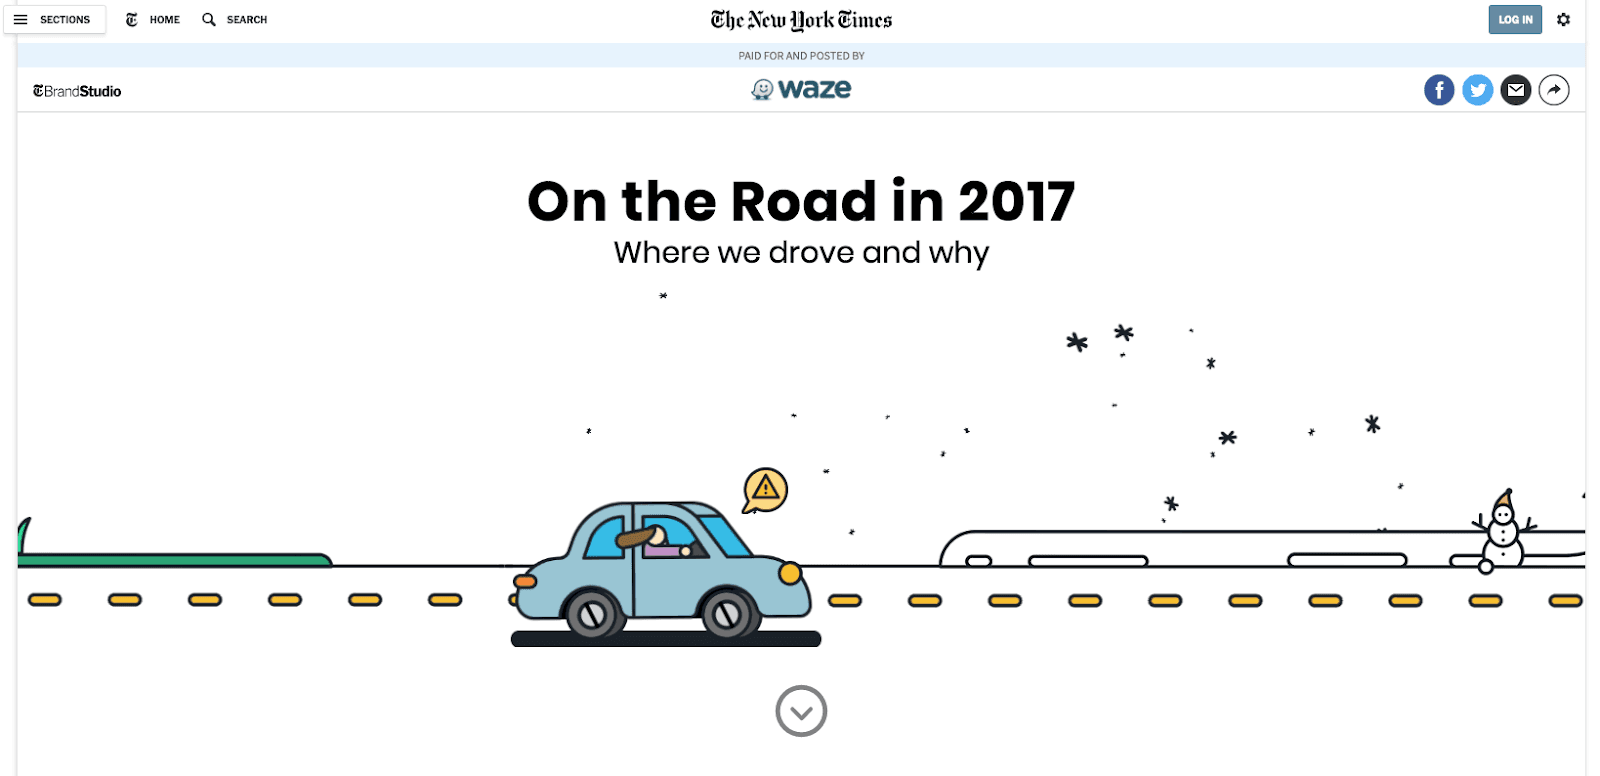 Waze ad in The New York Times of a car driving by a snowman